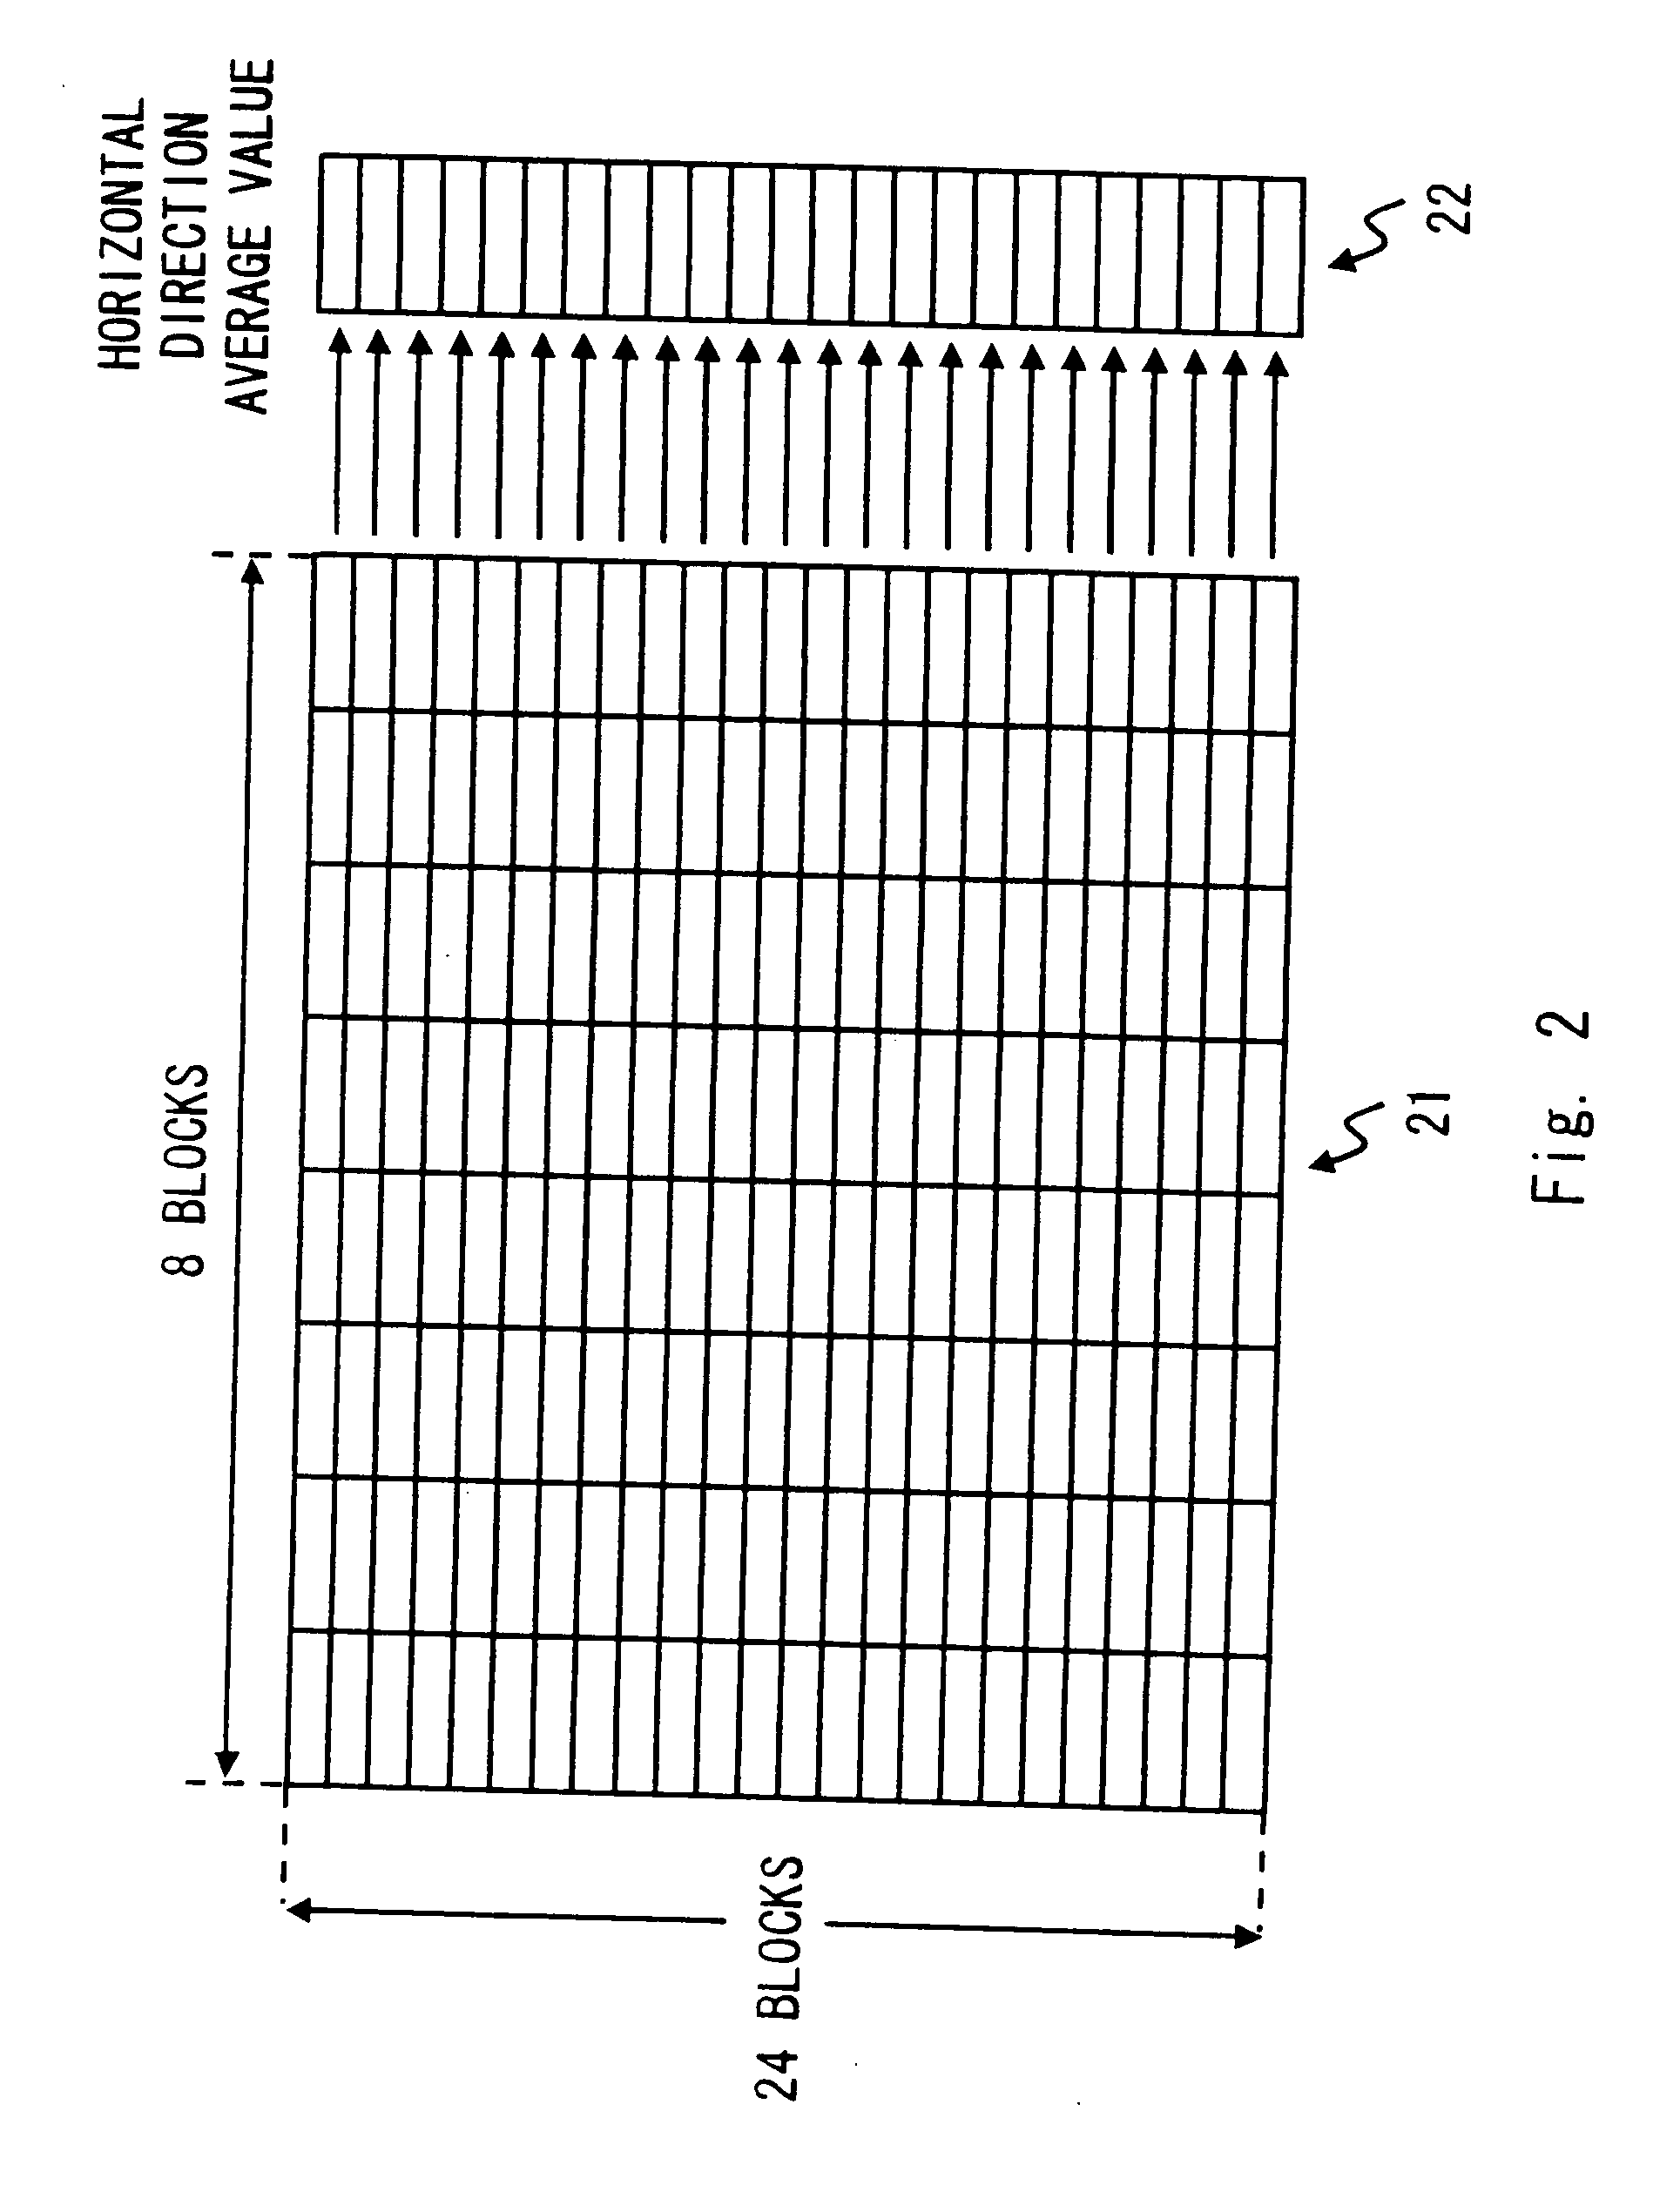 Imaging apparatus and flicker detection method